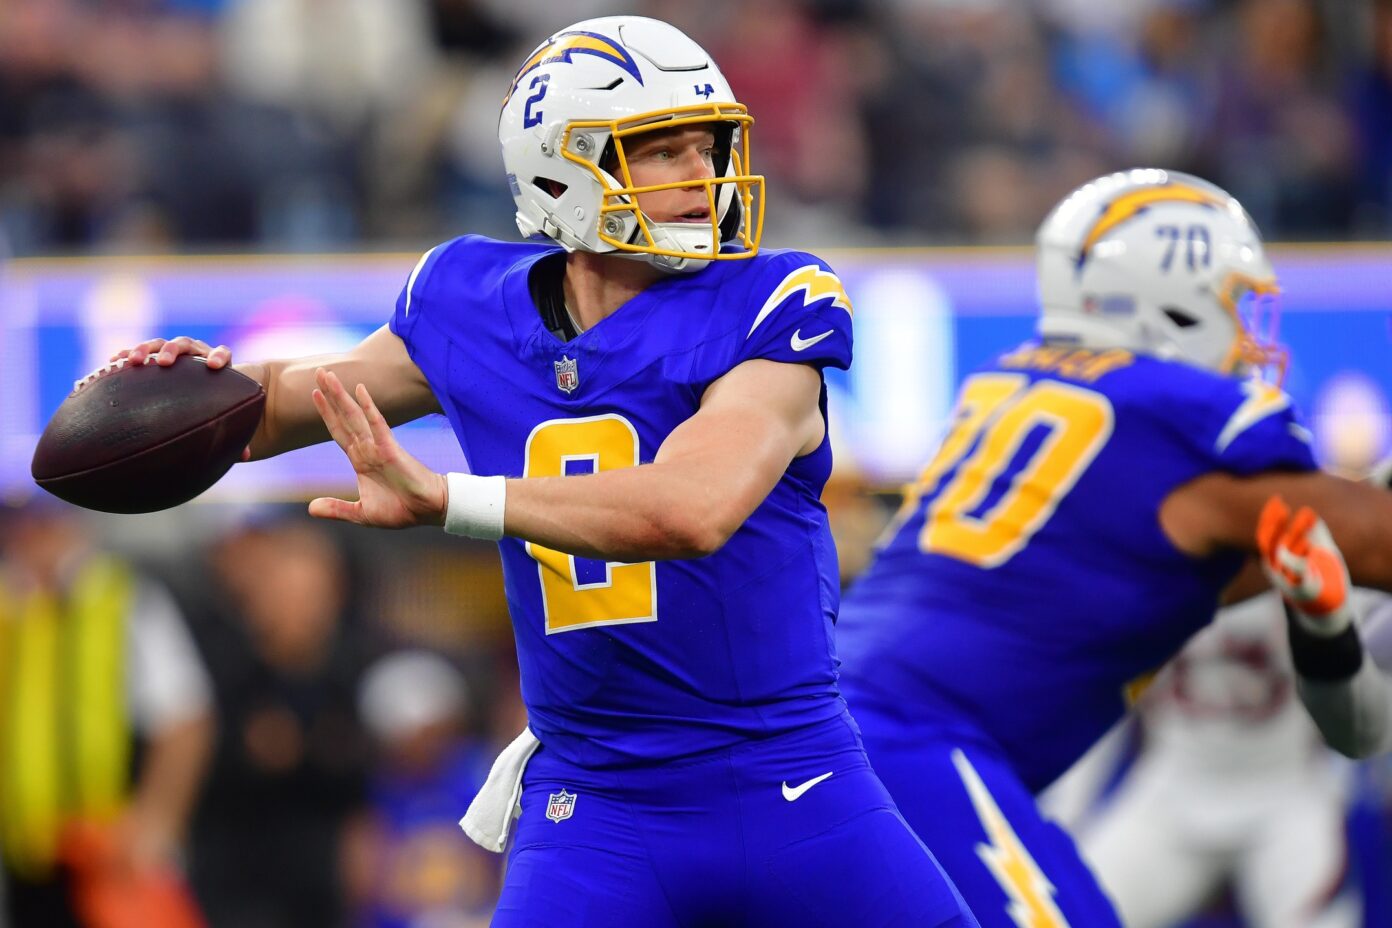 Easton Stick College Stats A Look Back at the Chargers' QB's College